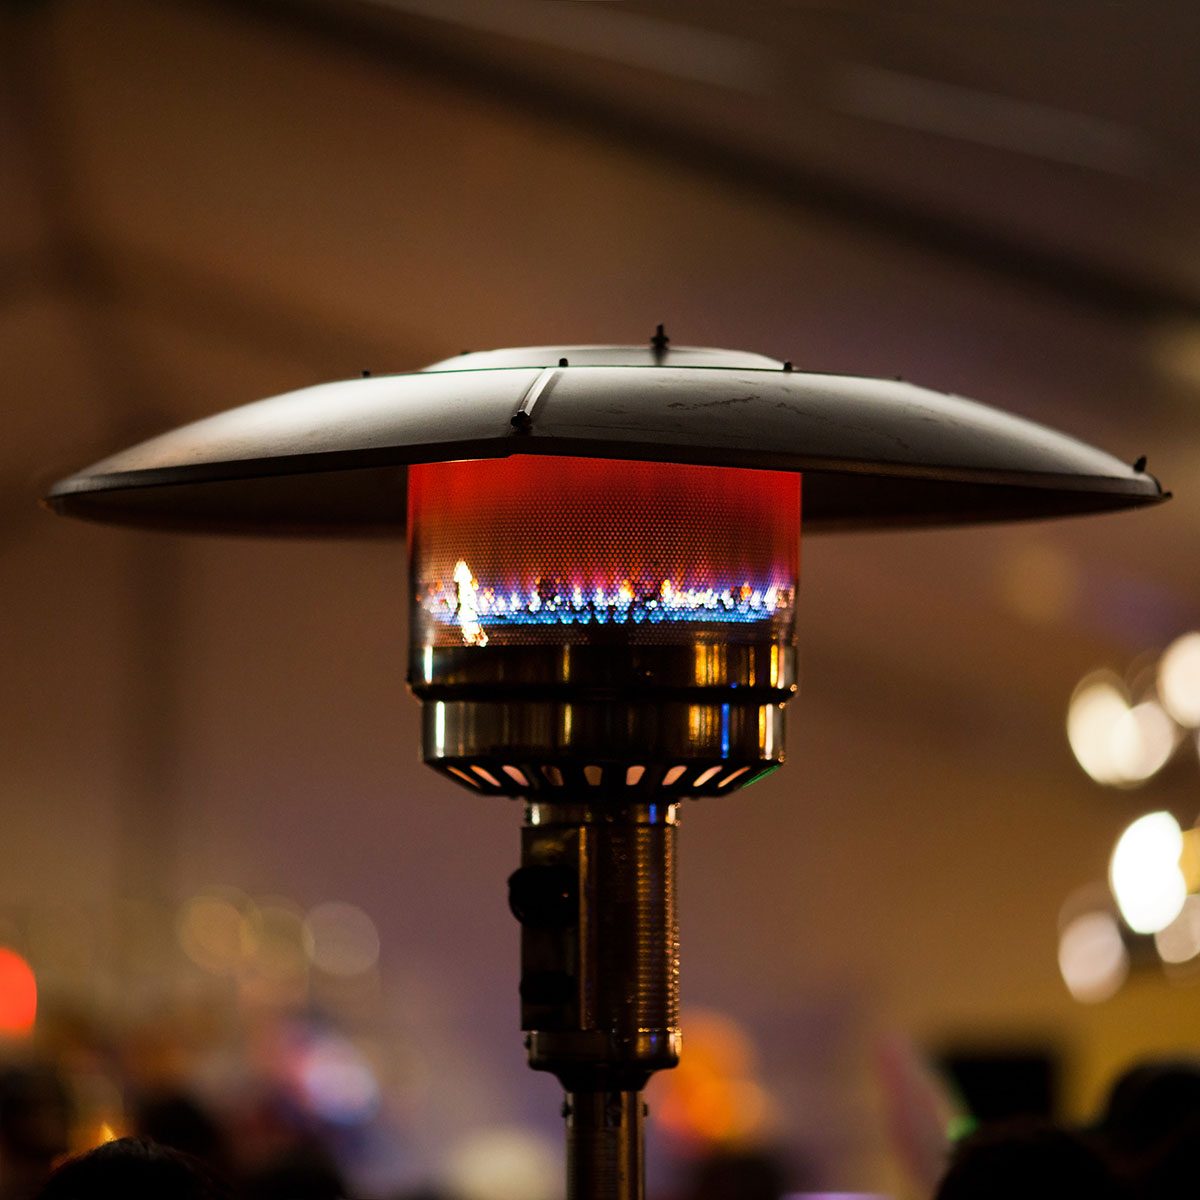 Outdoor Patio Heaters: Meaning, Types, Electric vs Gas Options